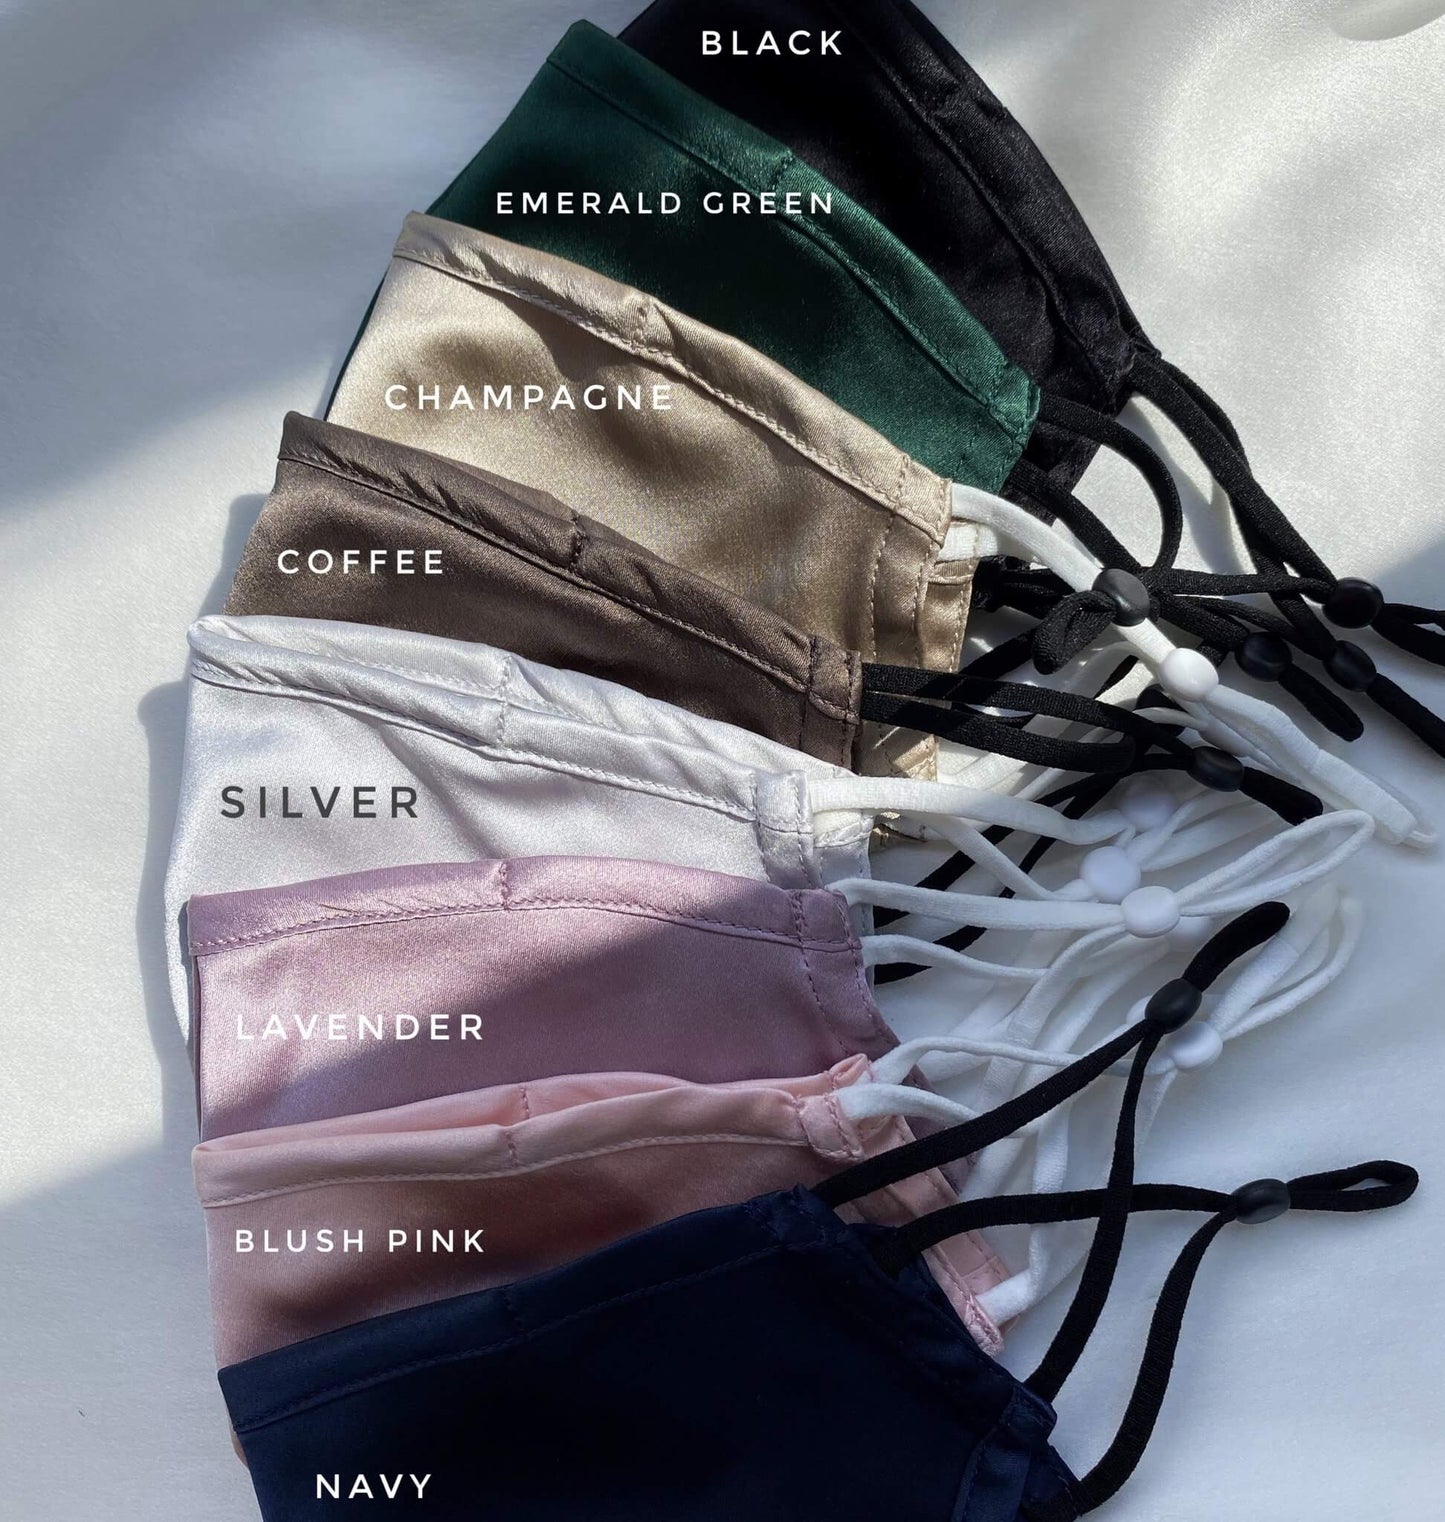 Available in 8 different colours, our best-selling silk masks are the best affordable yet luxurious gift option in Singapore. Crafted with OEKO-TEX® certified, pure mulberry silk, they are durable, practical and reusable.